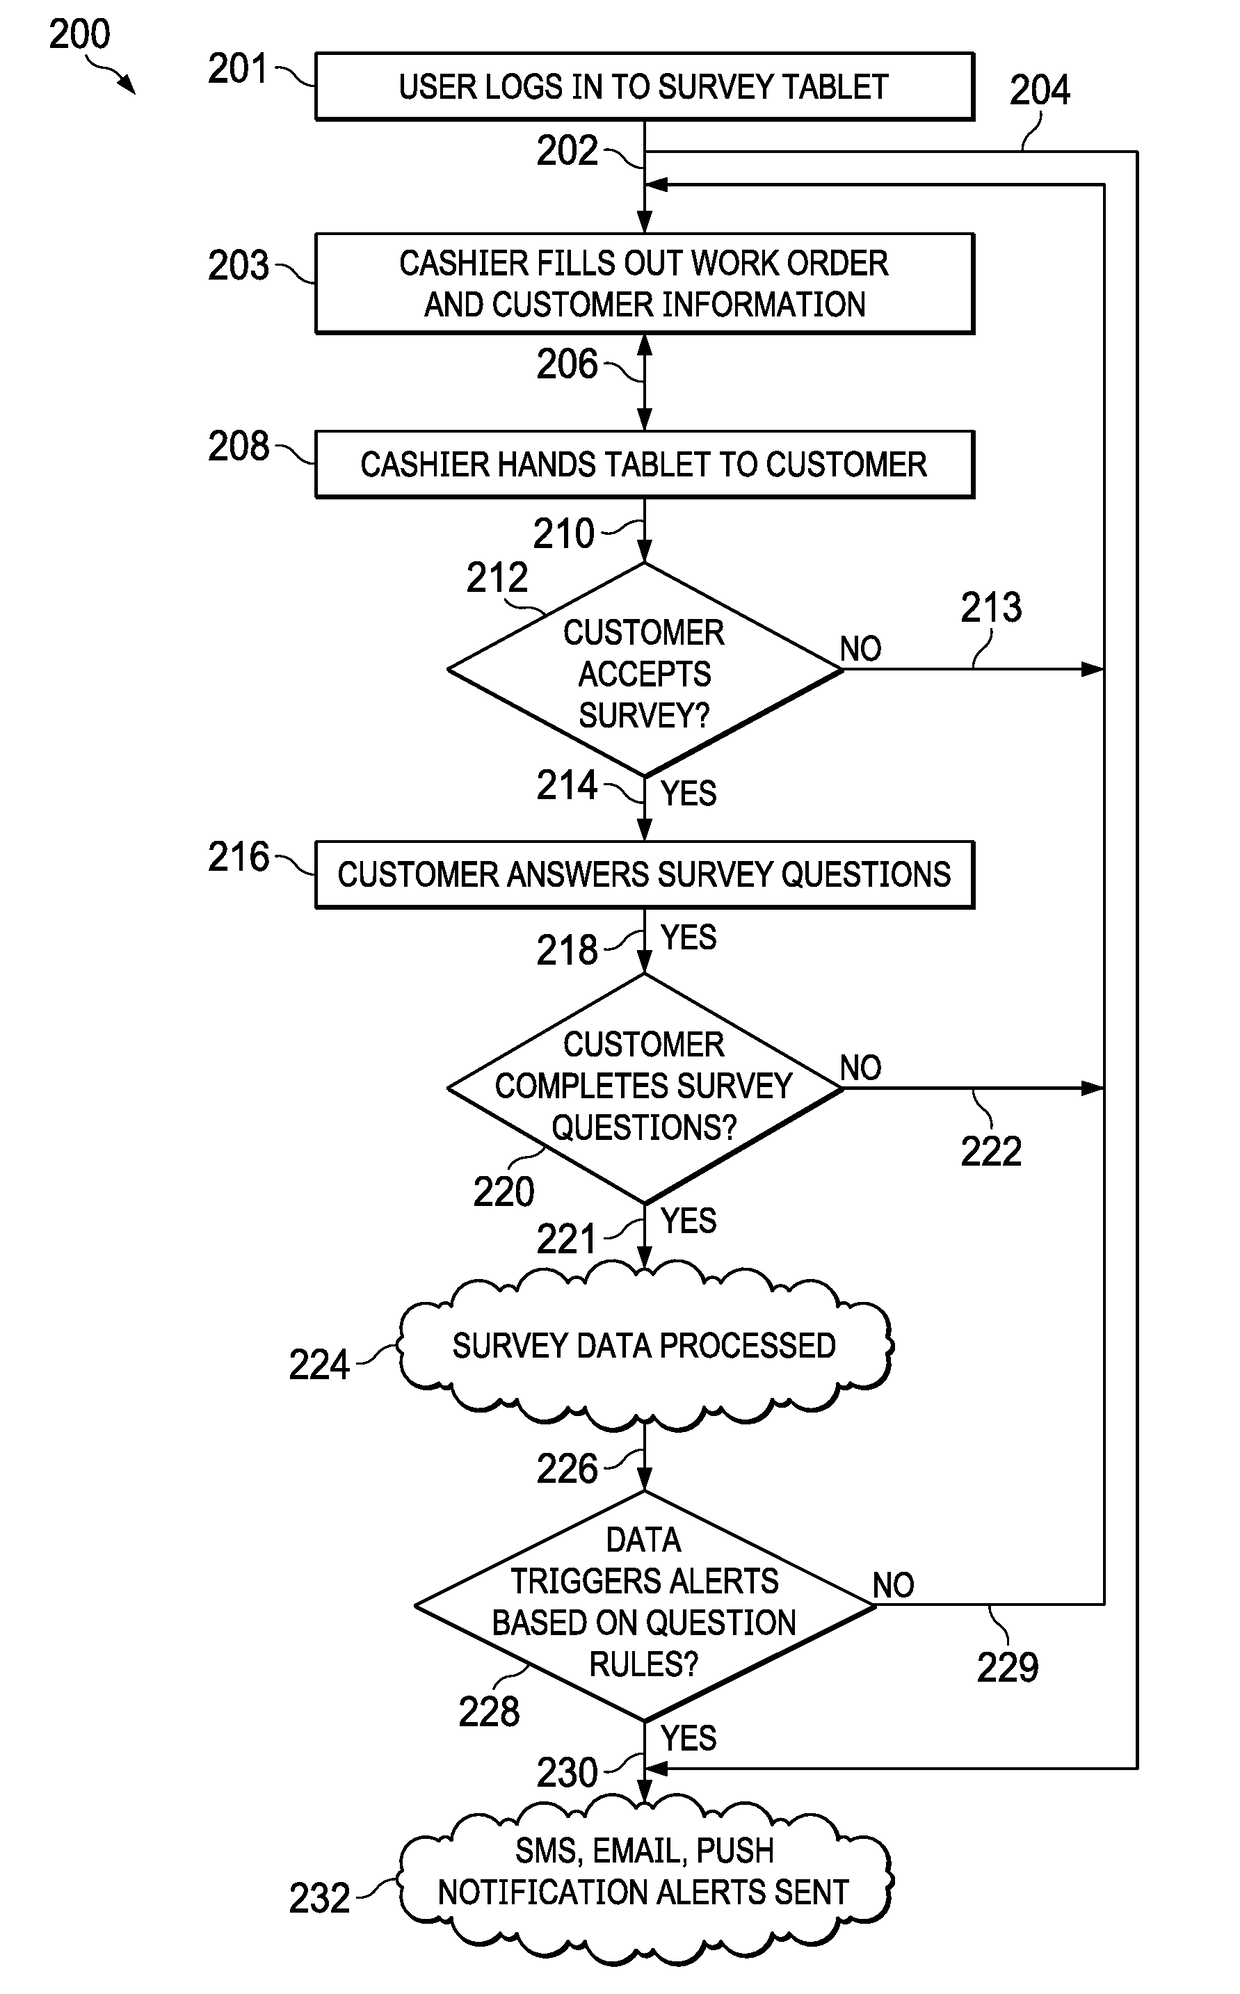 Method and System for Entry and Display of Customer Experience Feedback with Real-Time Automated Filtering and Evaluation of Feedback, Transmission of Real-Time Notification to Selected Personnel Based on Feedback Evaluation in a Flexible Messaging and Workflow System, and Follow-up Survey Consumer Evaluations